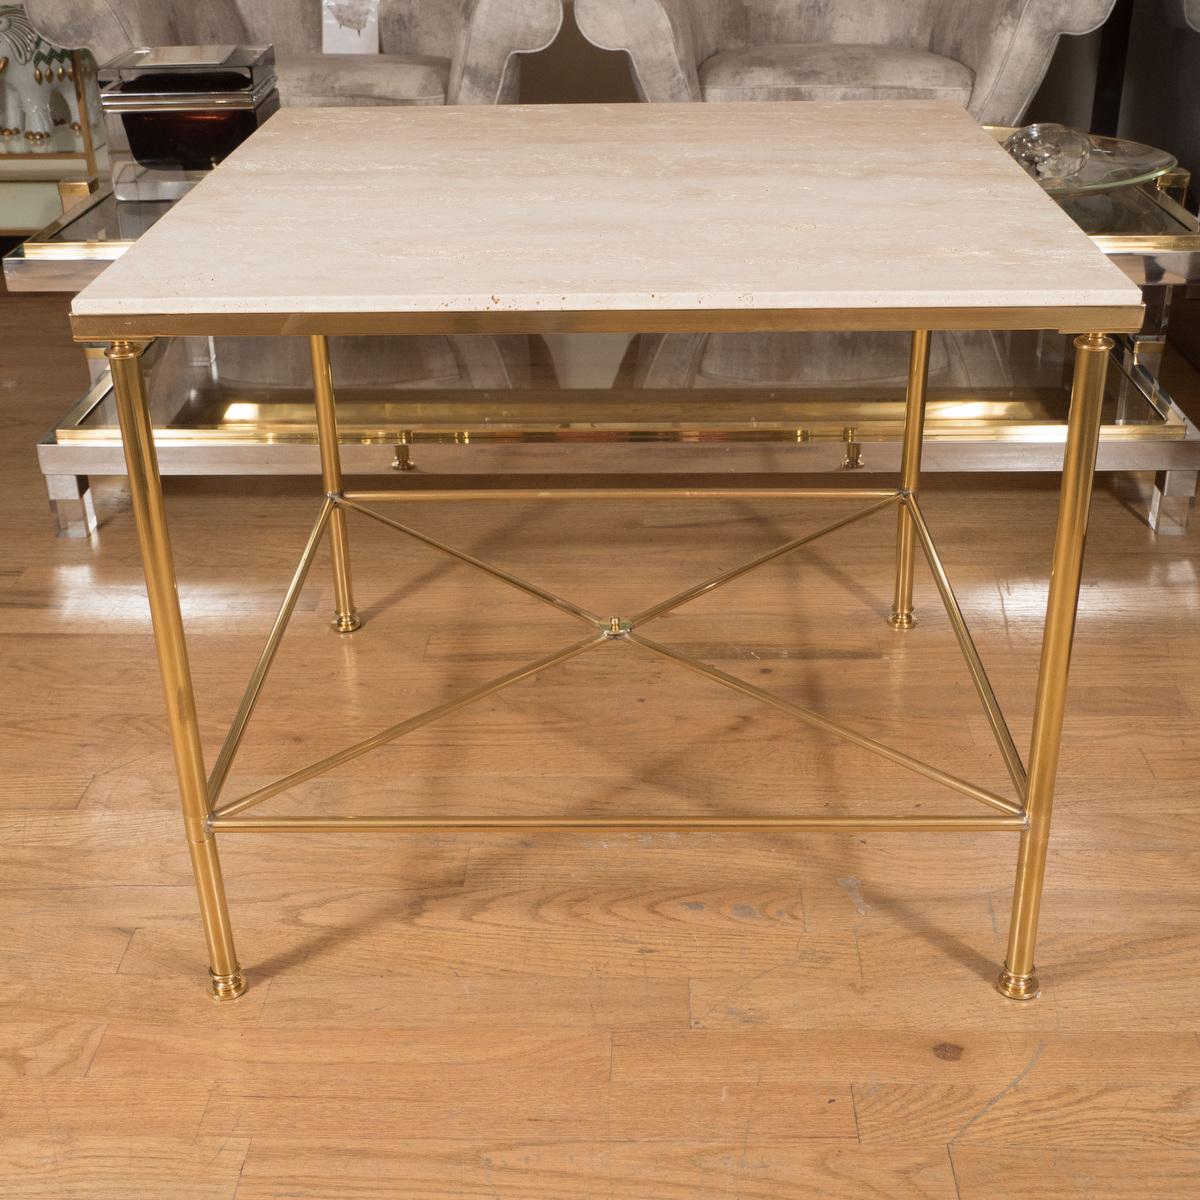 Pair of large brass side tables with X form bases and travertine tops.

Dimensions: 25.75